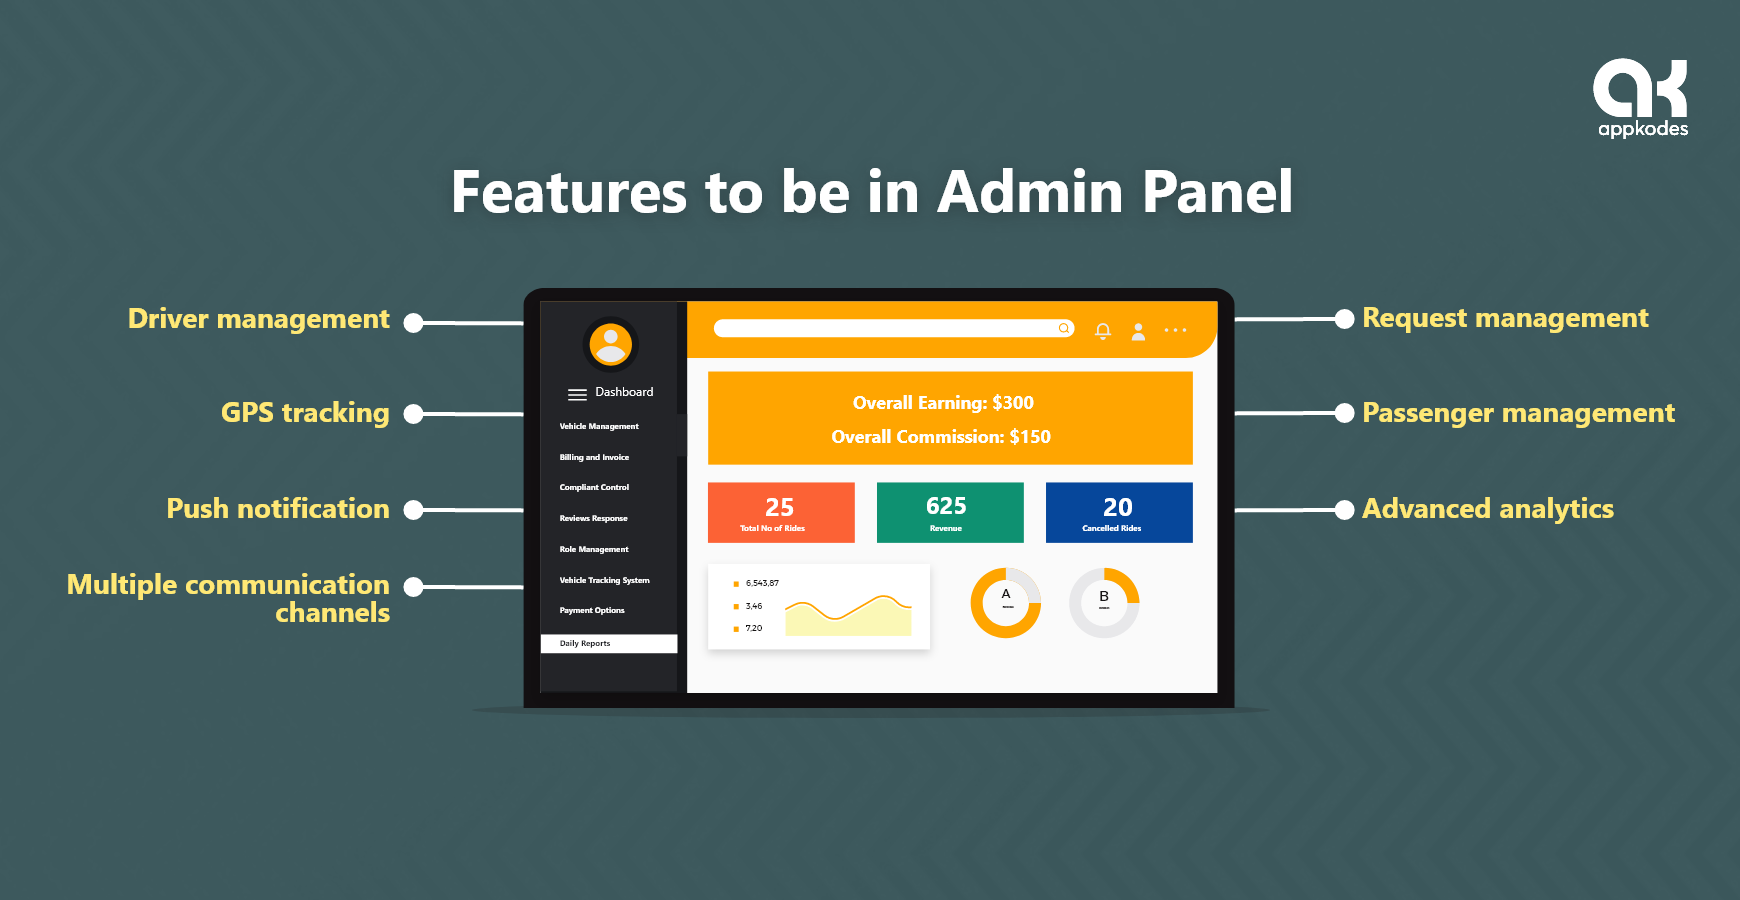 Features to be in Admin Panel